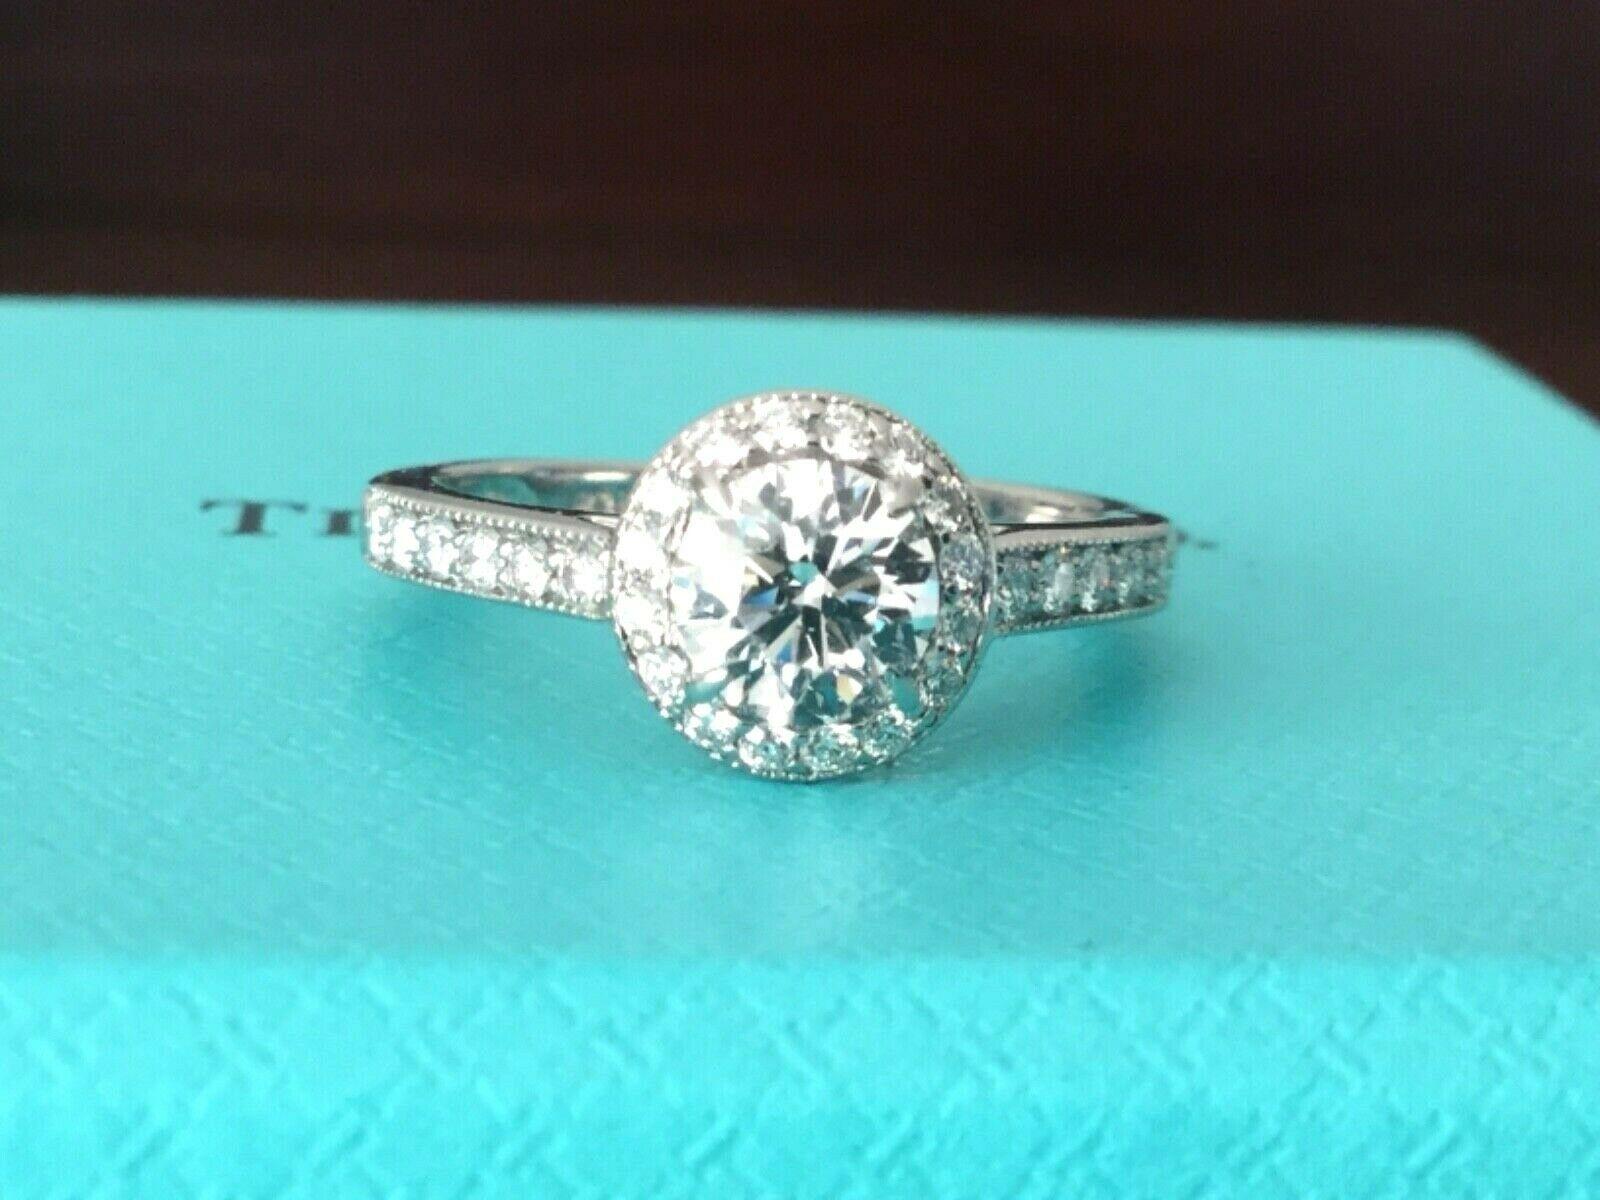 
For your consideration is a Tiffany & Co natural Round diamond halo engagement ring set in platinum.  The center stone is a natural round .51 carat white diamond, E Color, VS1 Clarity and Triple Excellent Cut, Polish and Symmetry making it an